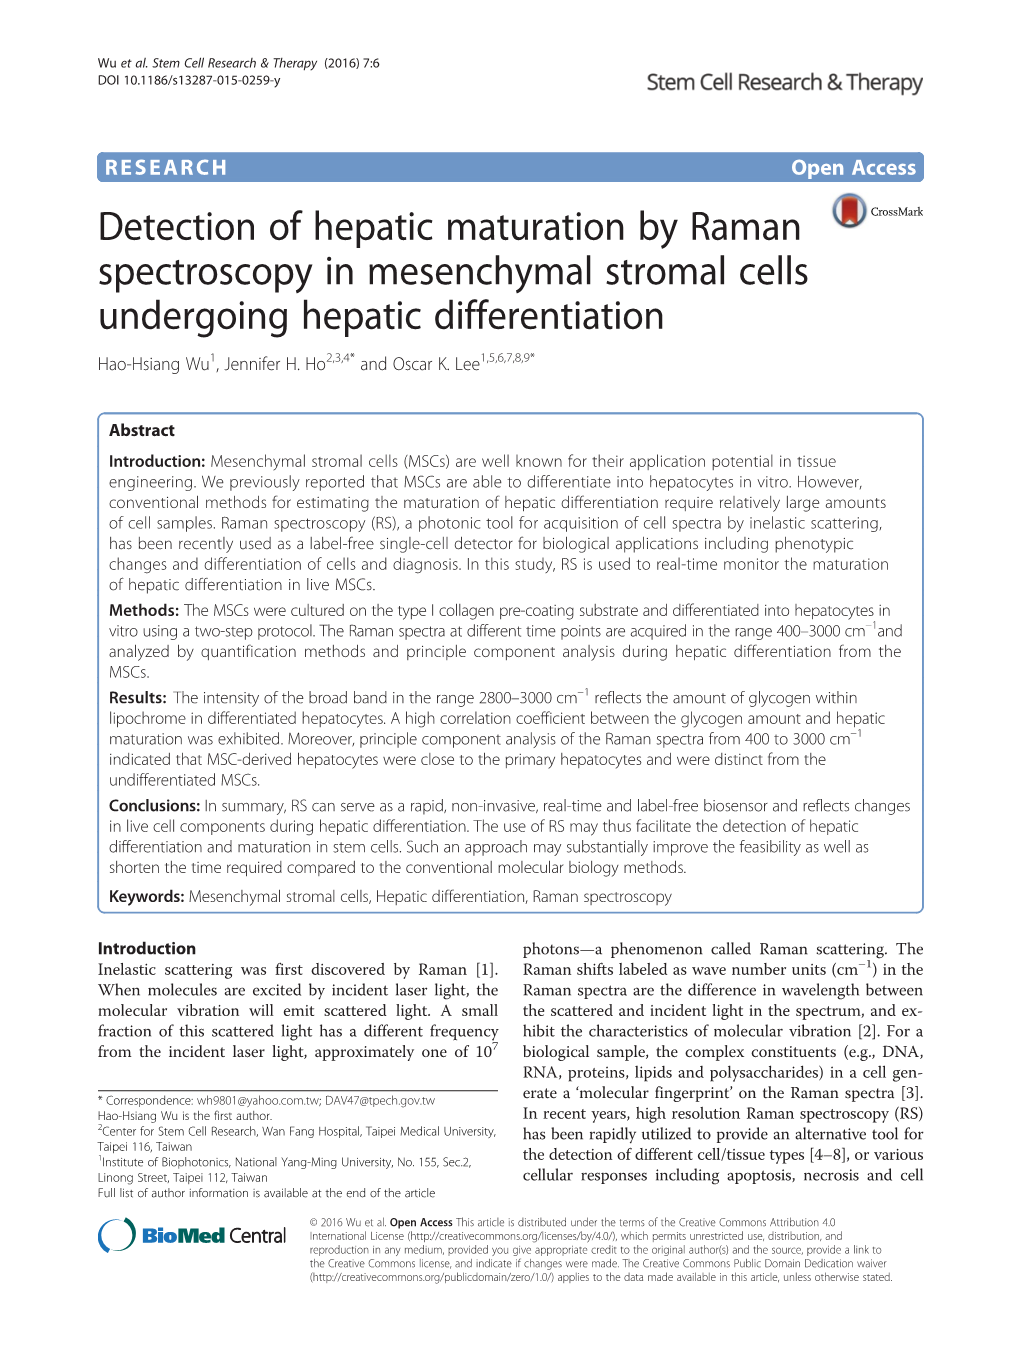 Detection of Hepatic Maturation by Raman Spectroscopy in Mesenchymal Stromal Cells Undergoing Hepatic Differentiation Hao-Hsiang Wu1, Jennifer H